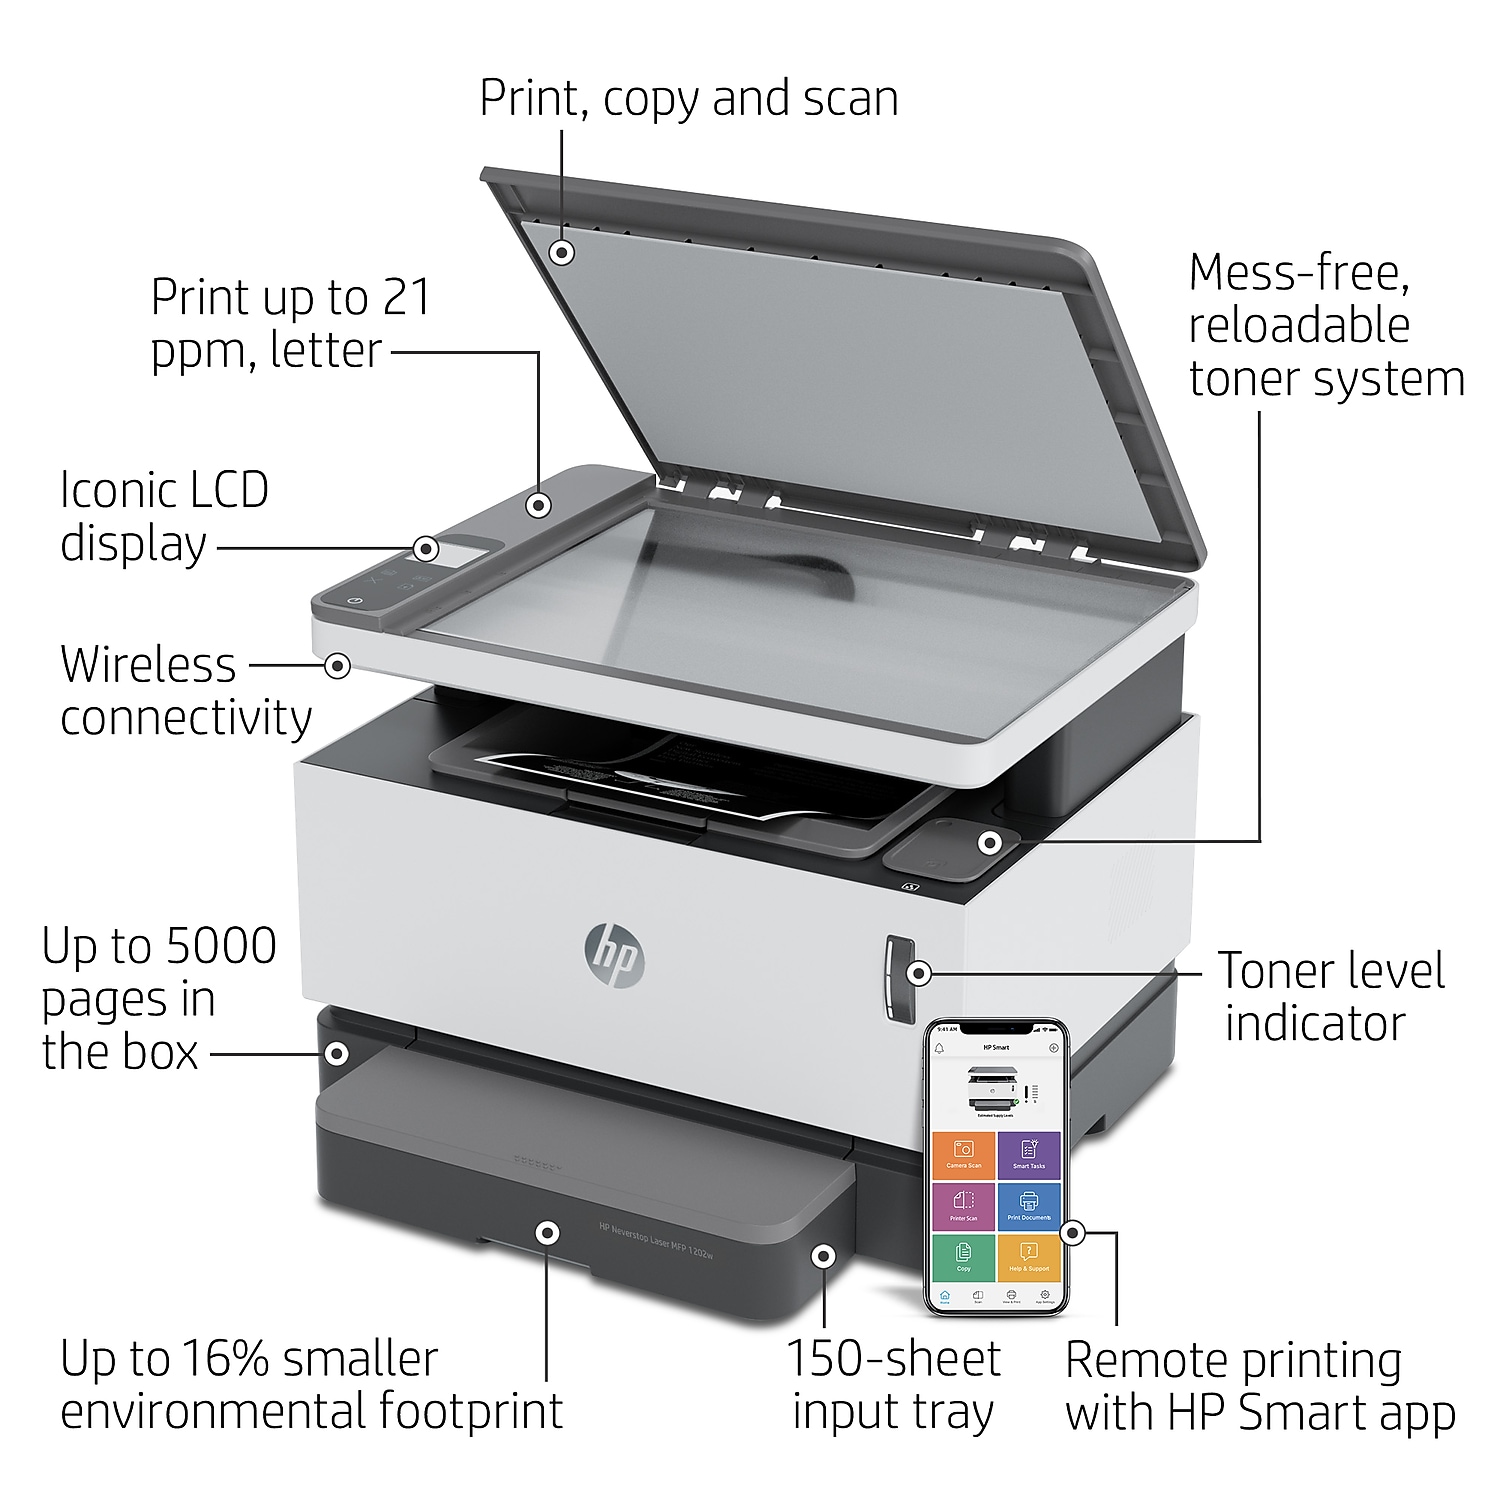 HP Neverstop MFP 1202w Wireless Laser All-In-One Refillable Tank Monochrome Printer - image 3 of 9